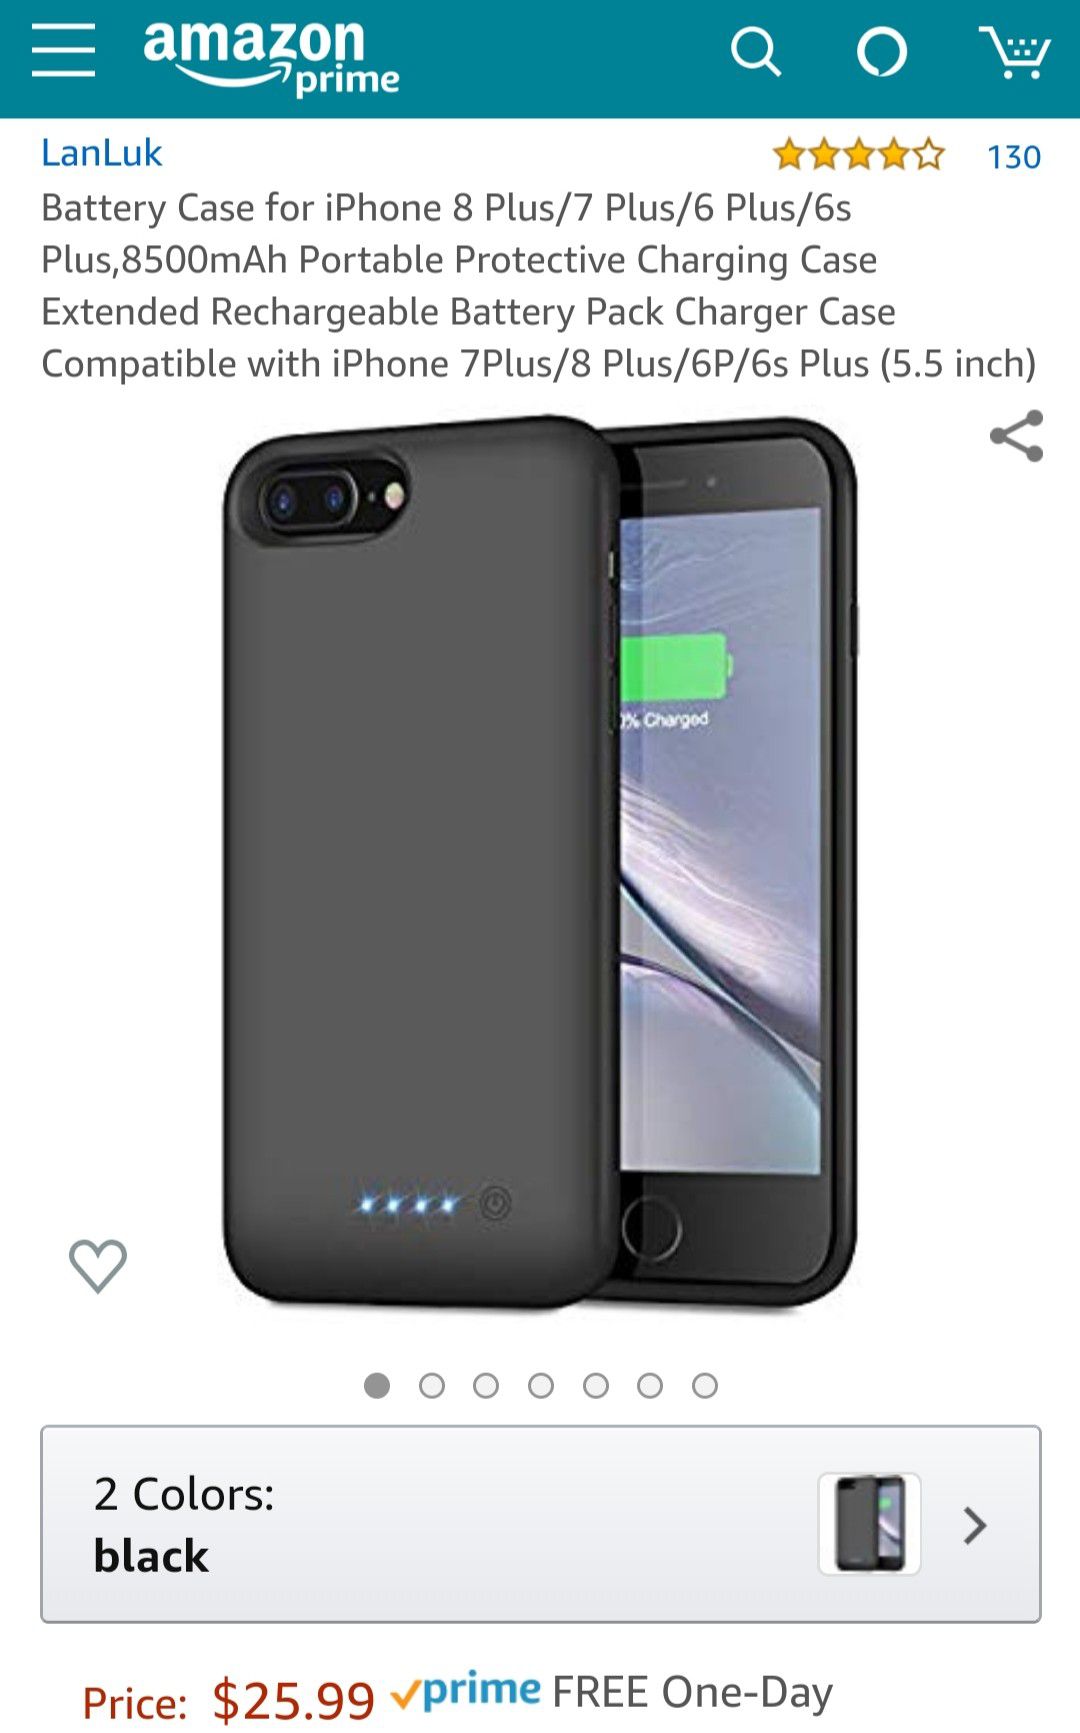 NEW iphone 6/6s/7/8 plus battery case